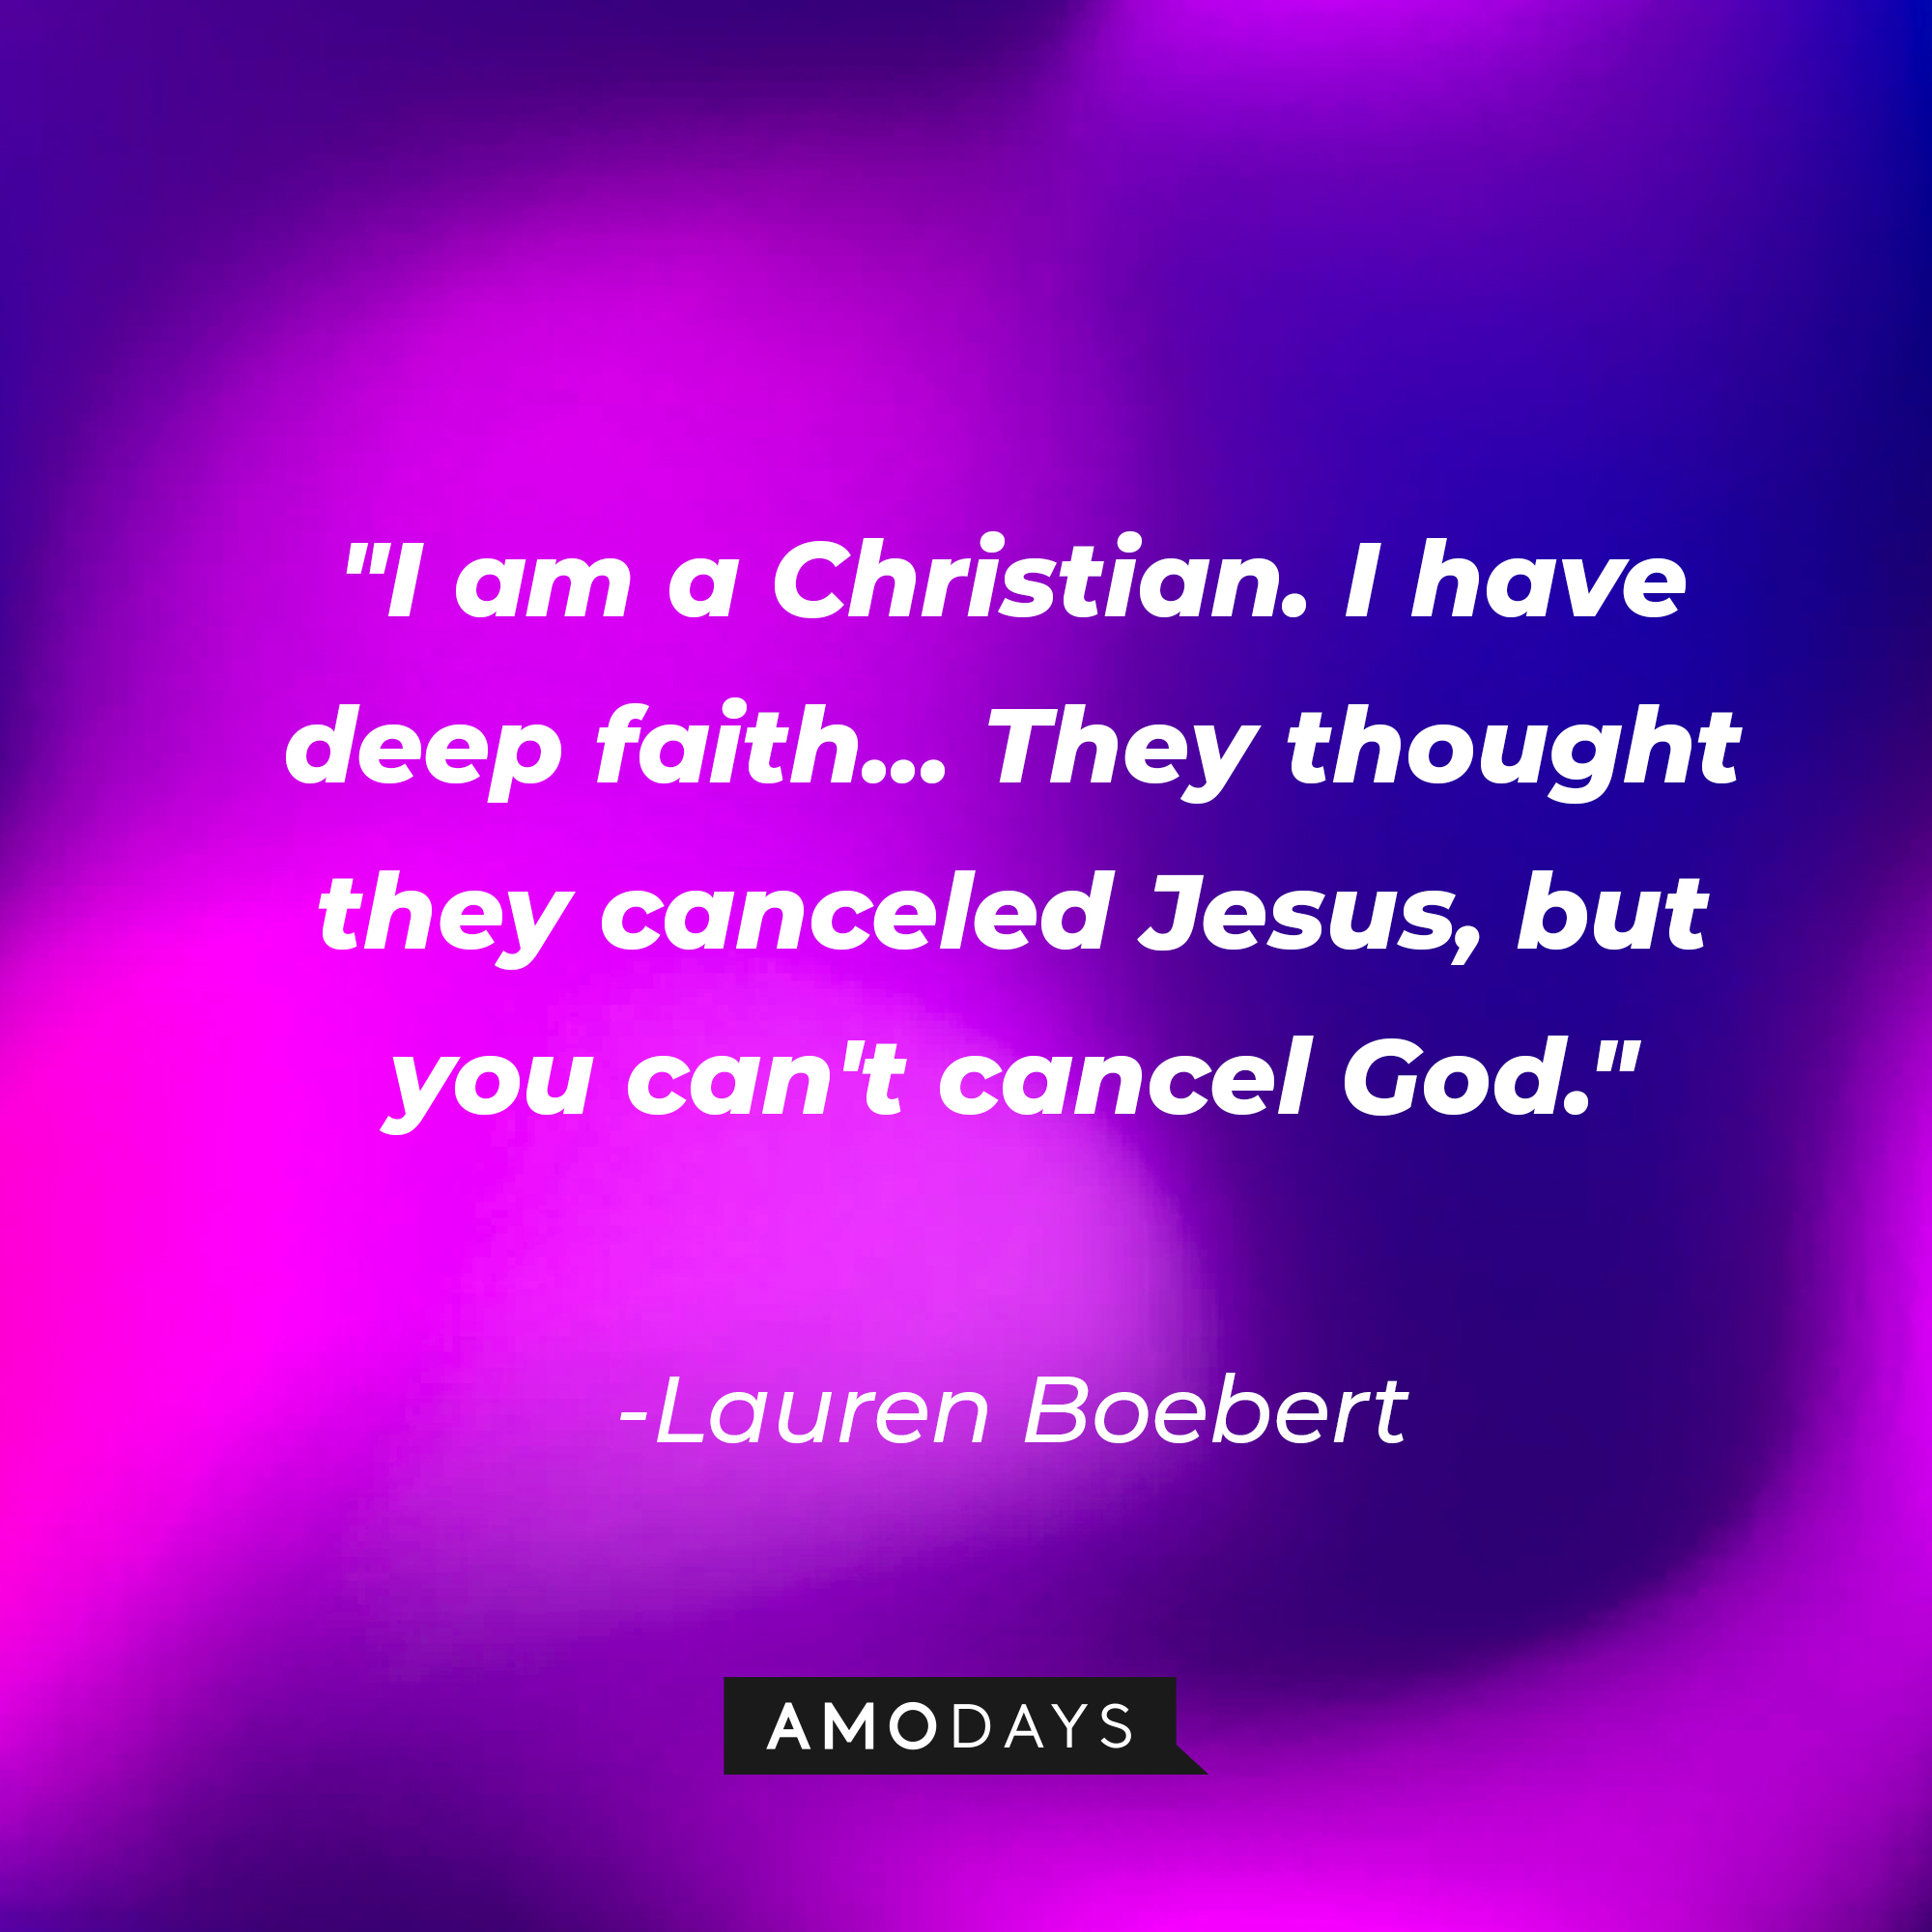 Lauren Boebert's quote: "I am a Christian. I have deep faith... They thought they canceled Jesus, but you can't cancel God." | Source: AmoDays